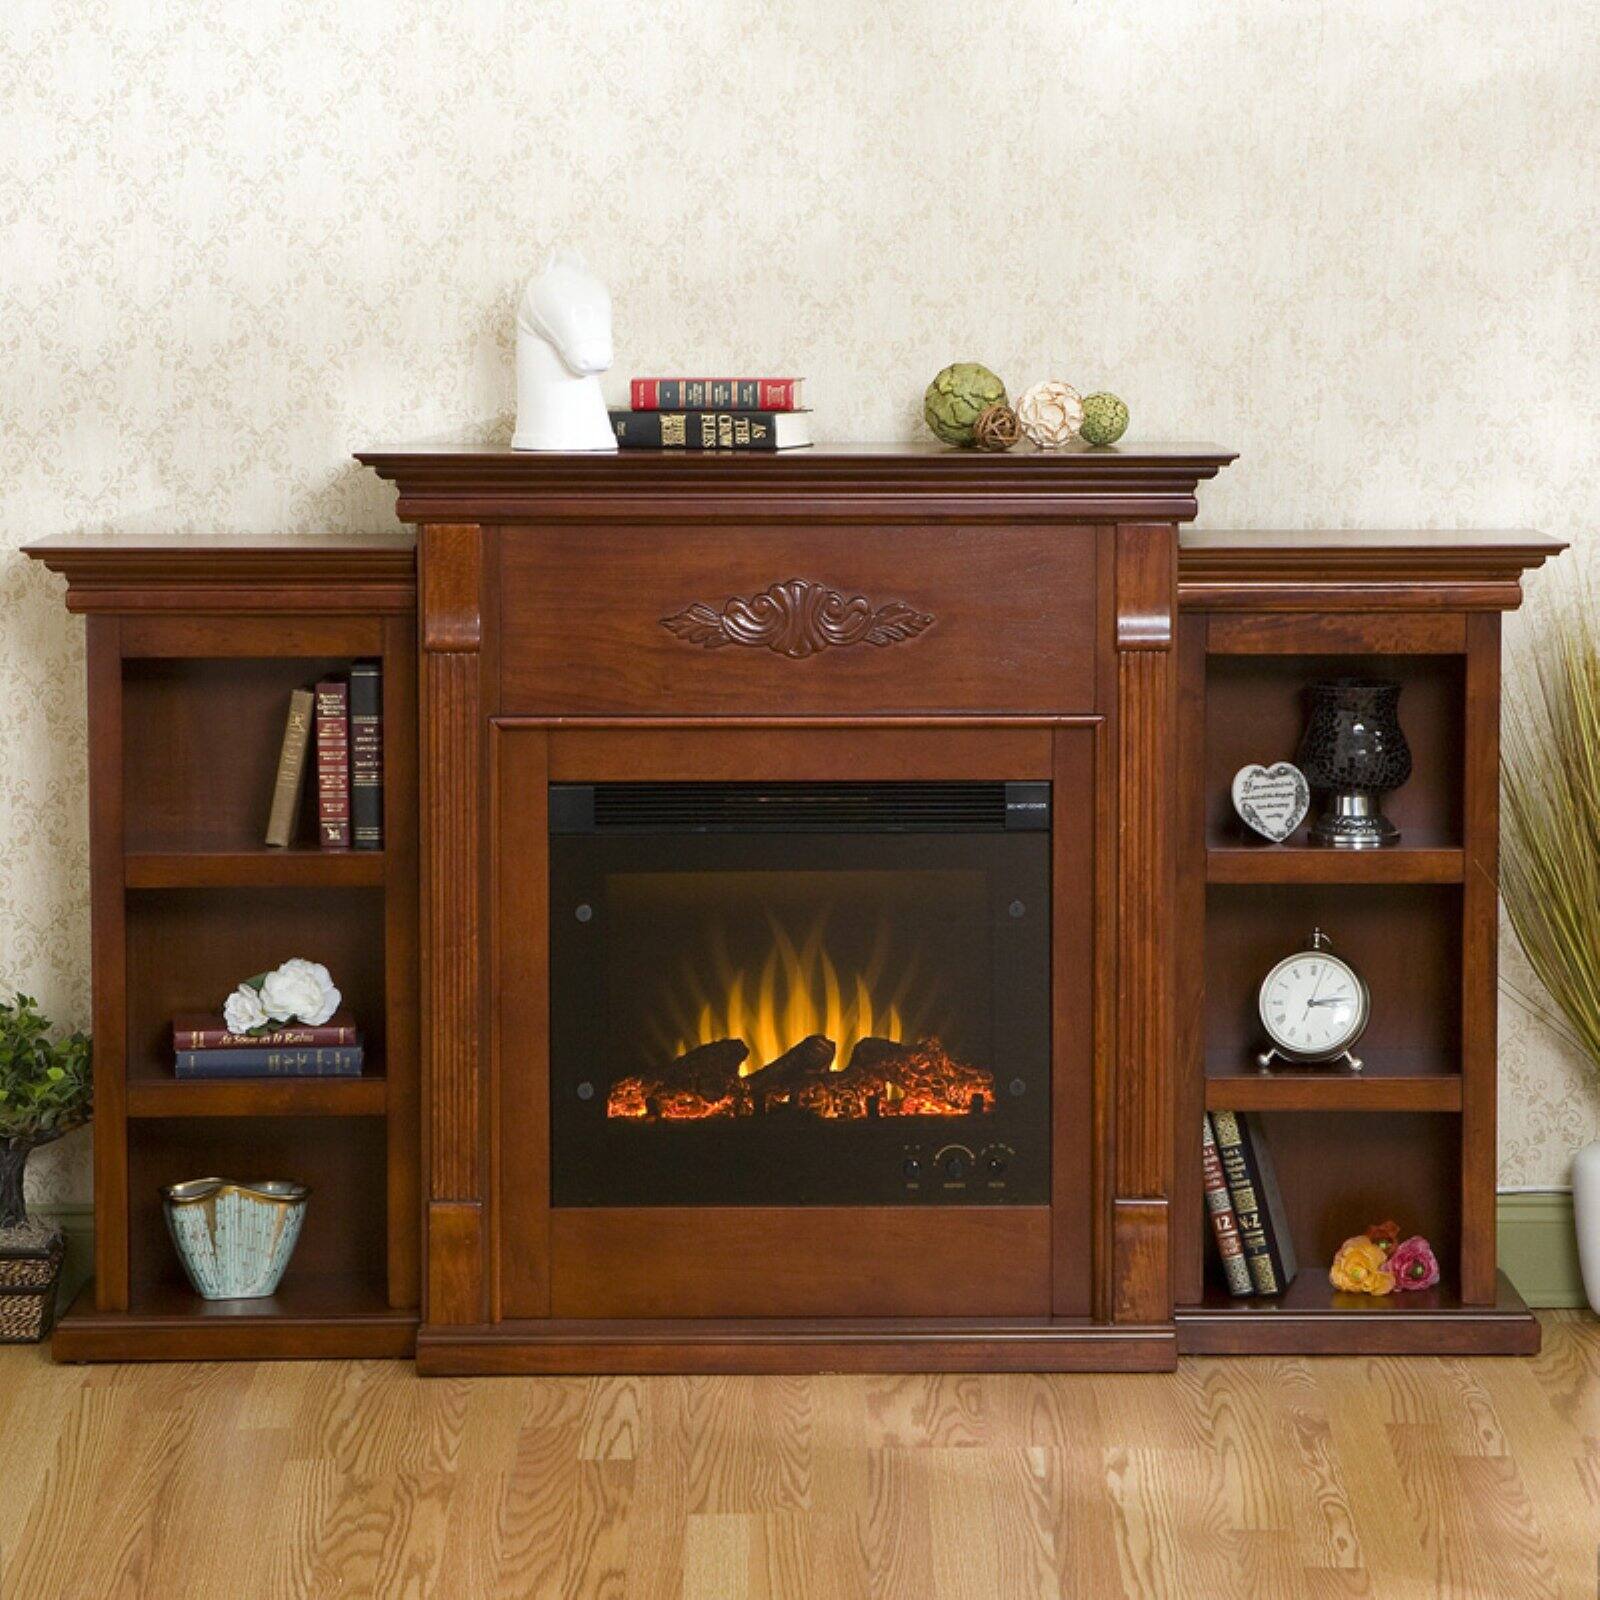 SEI Furniture Fredricksburg Wood Electric Fireplace with Bookcases in Brown - image 2 of 2